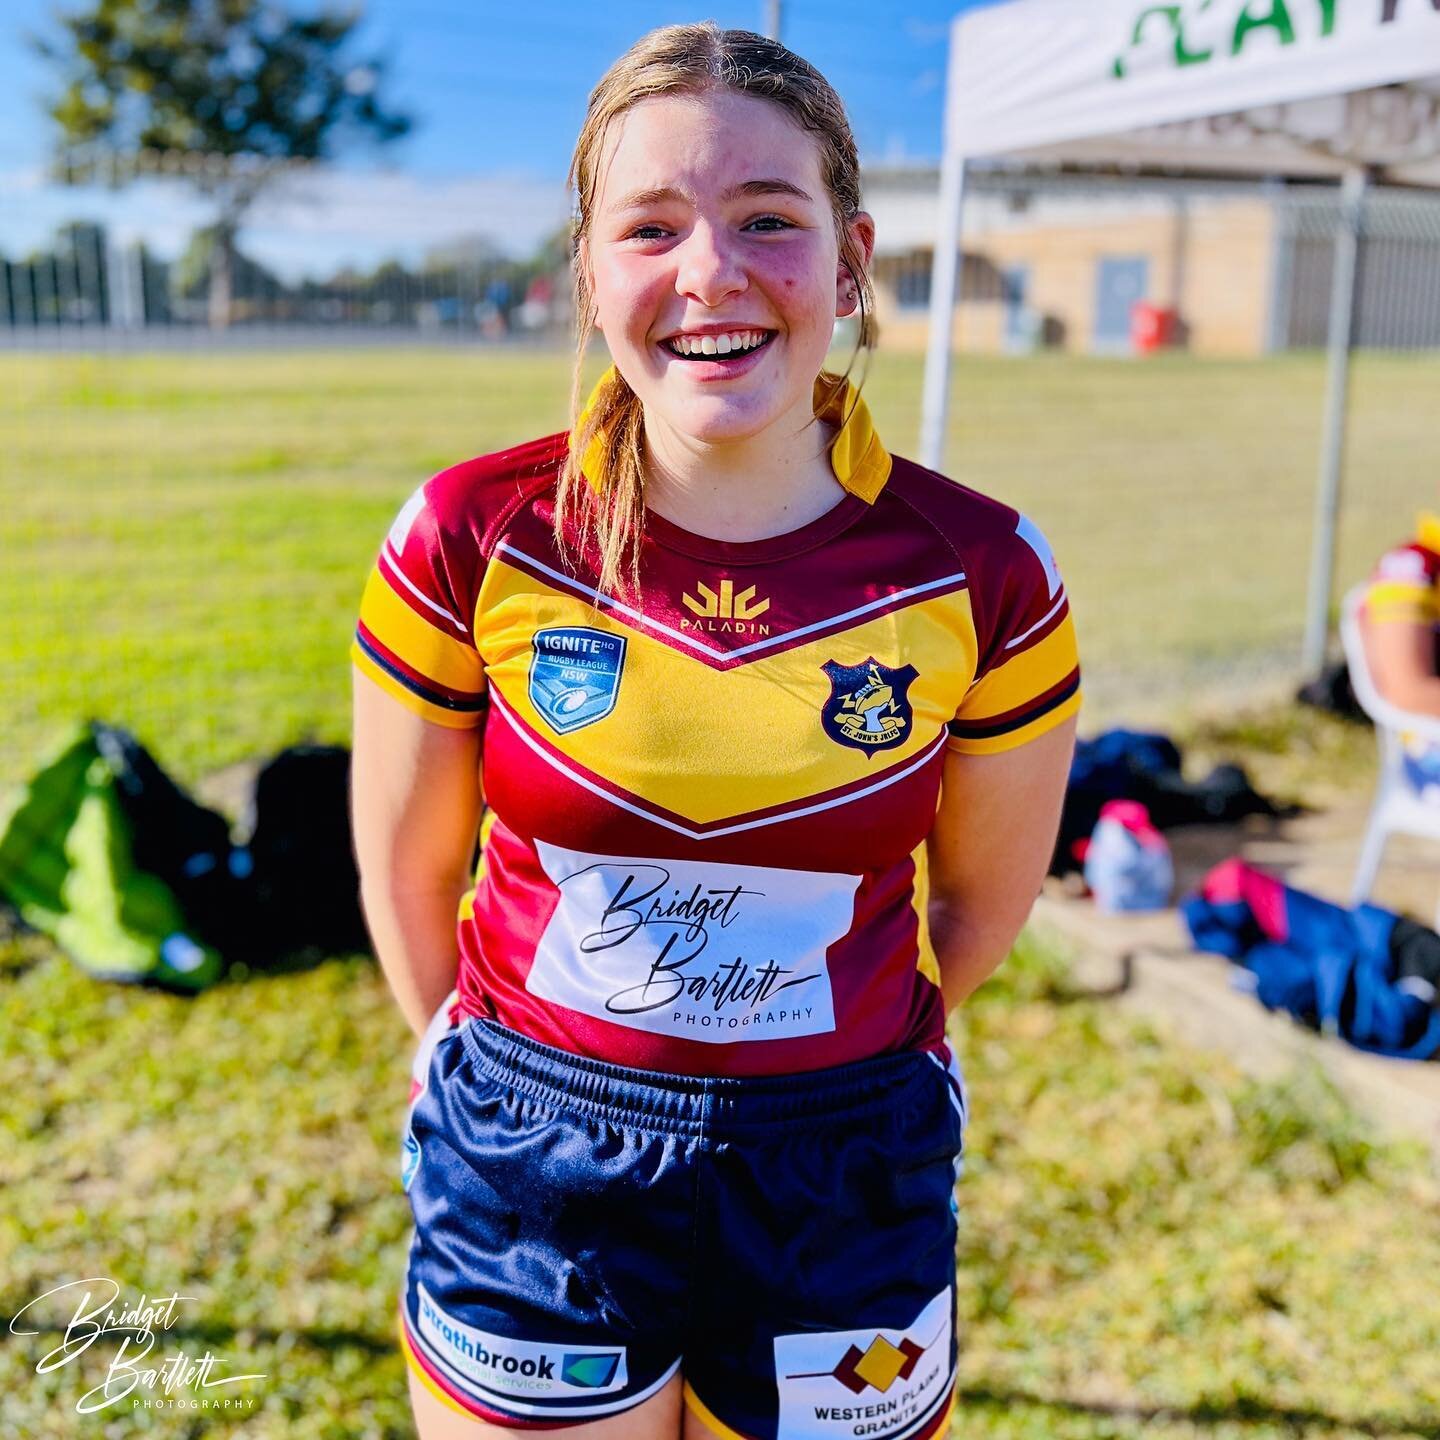 📸 🏉🎉 Proud to be a sponsor of St Johns JRLFC, and especially thrilled to support the U14 Maroon league tag team. Huge congratulations to the girls on their fantastic win today! 🙌🥳 A big thanks to my amazing model, Addie, for helping me showcase 